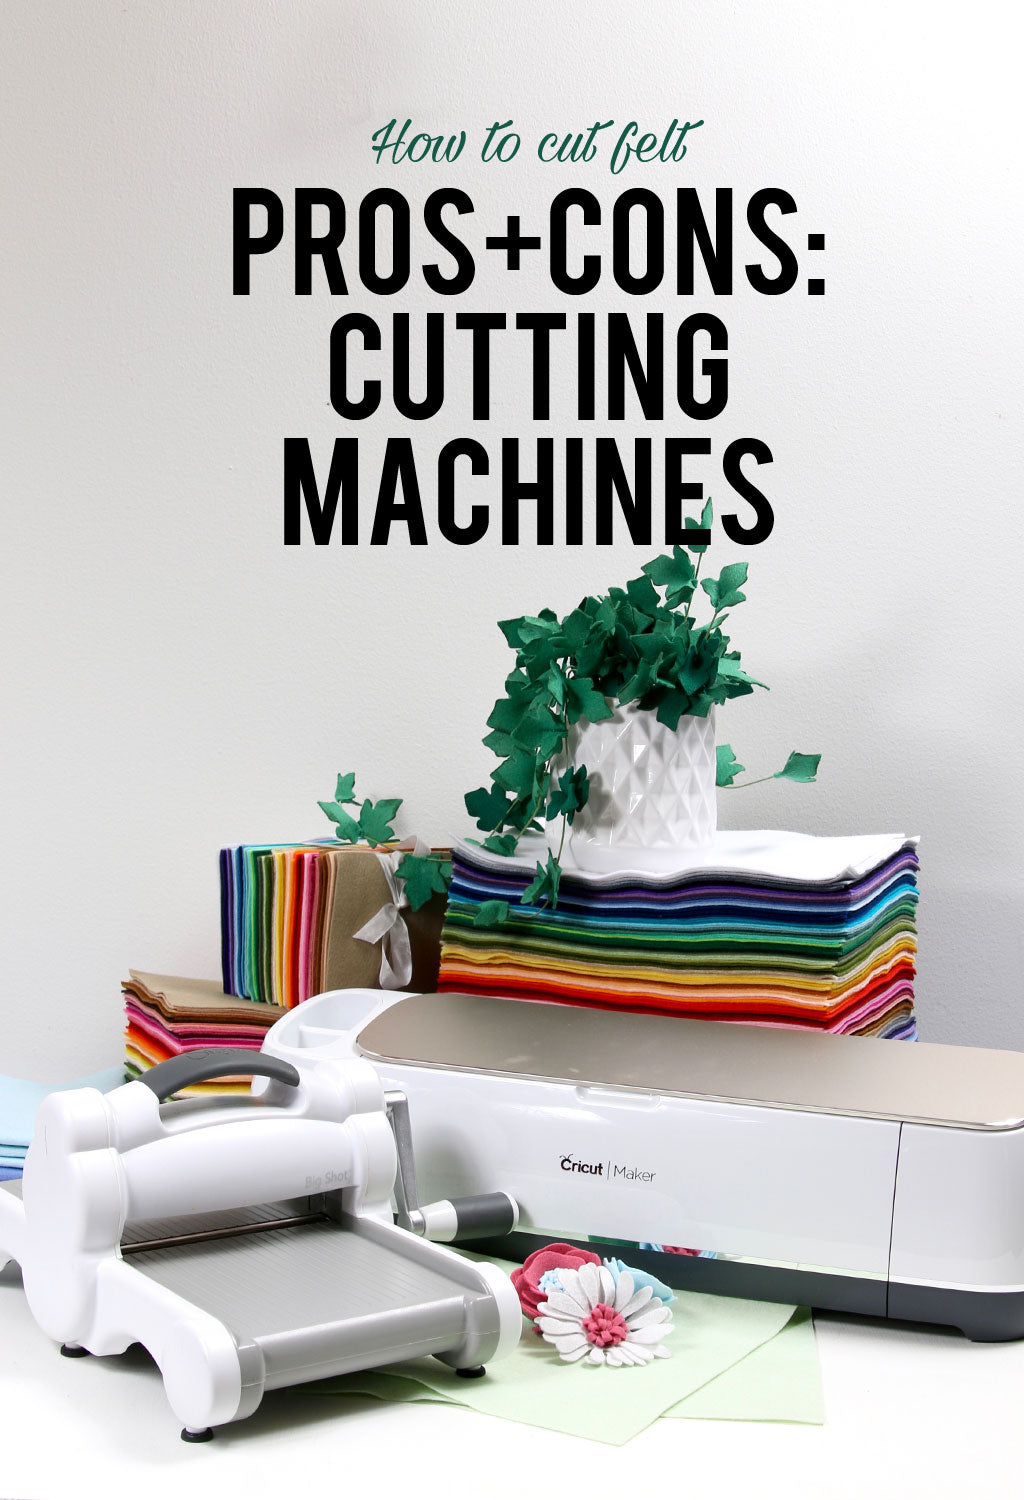 Pros and cons of cutting machines